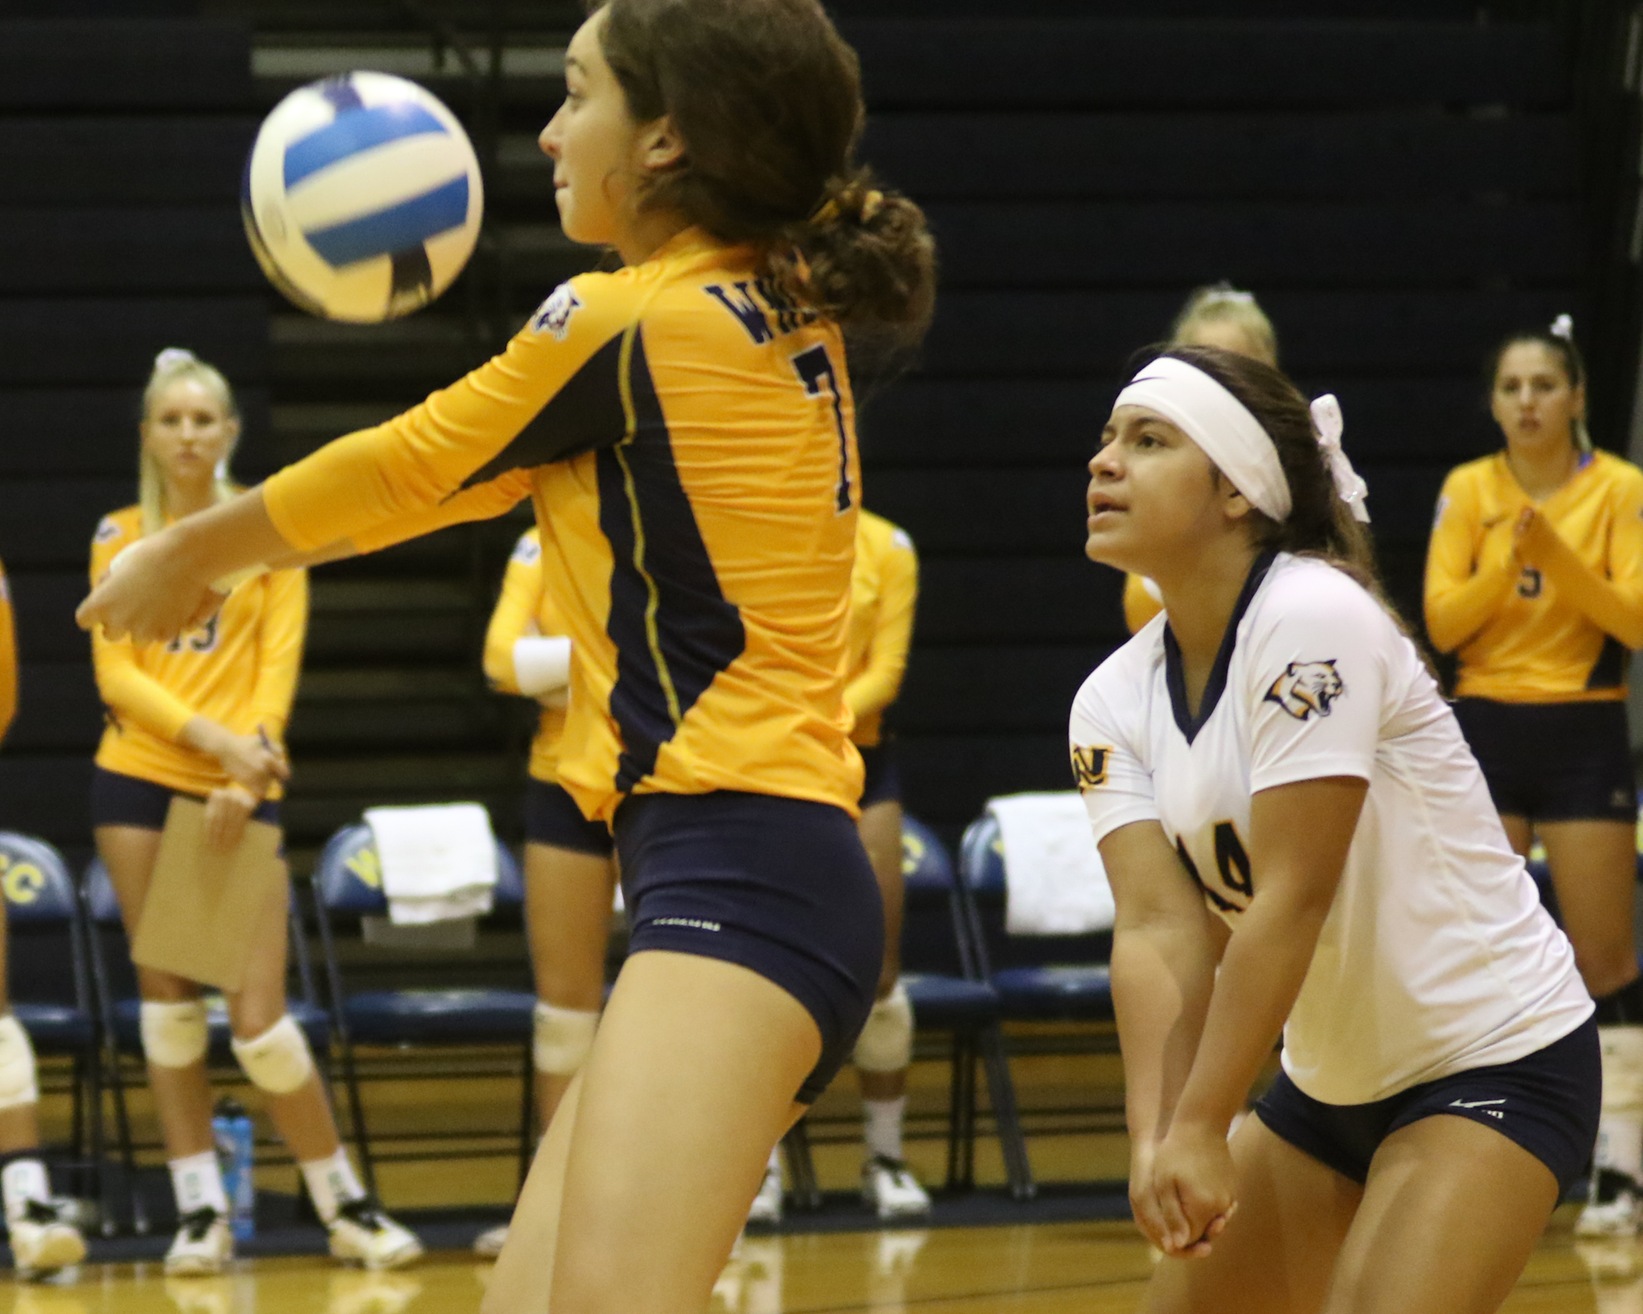 WNCC volleyball splits matches against two ranked teams